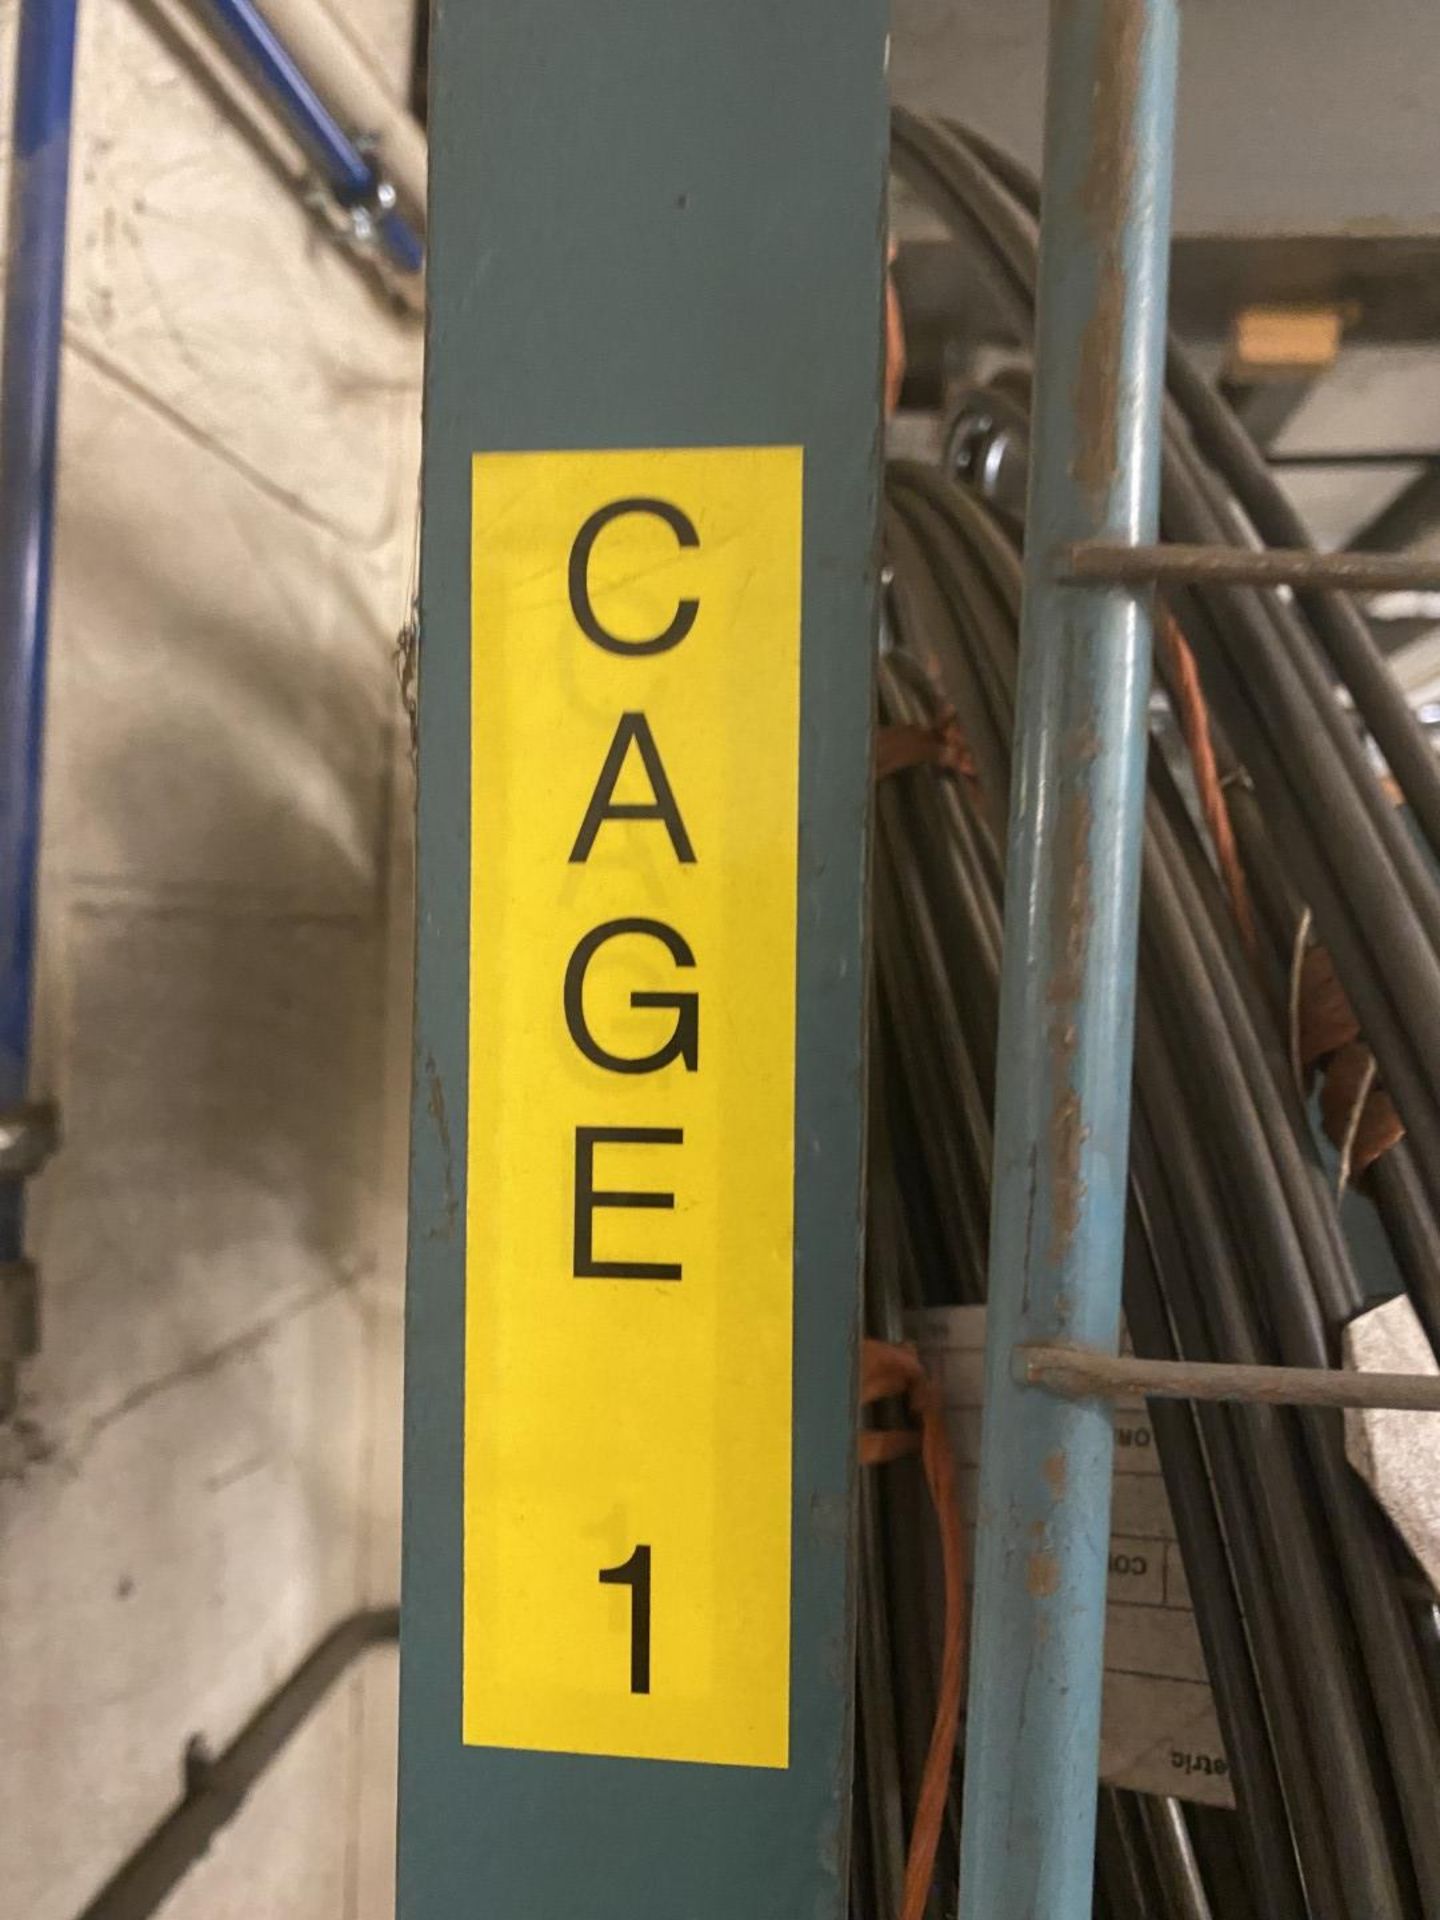 1 x Pallet Sized Metal Cage Containing a Quantity of Metal Wire Bundles - Image 2 of 2